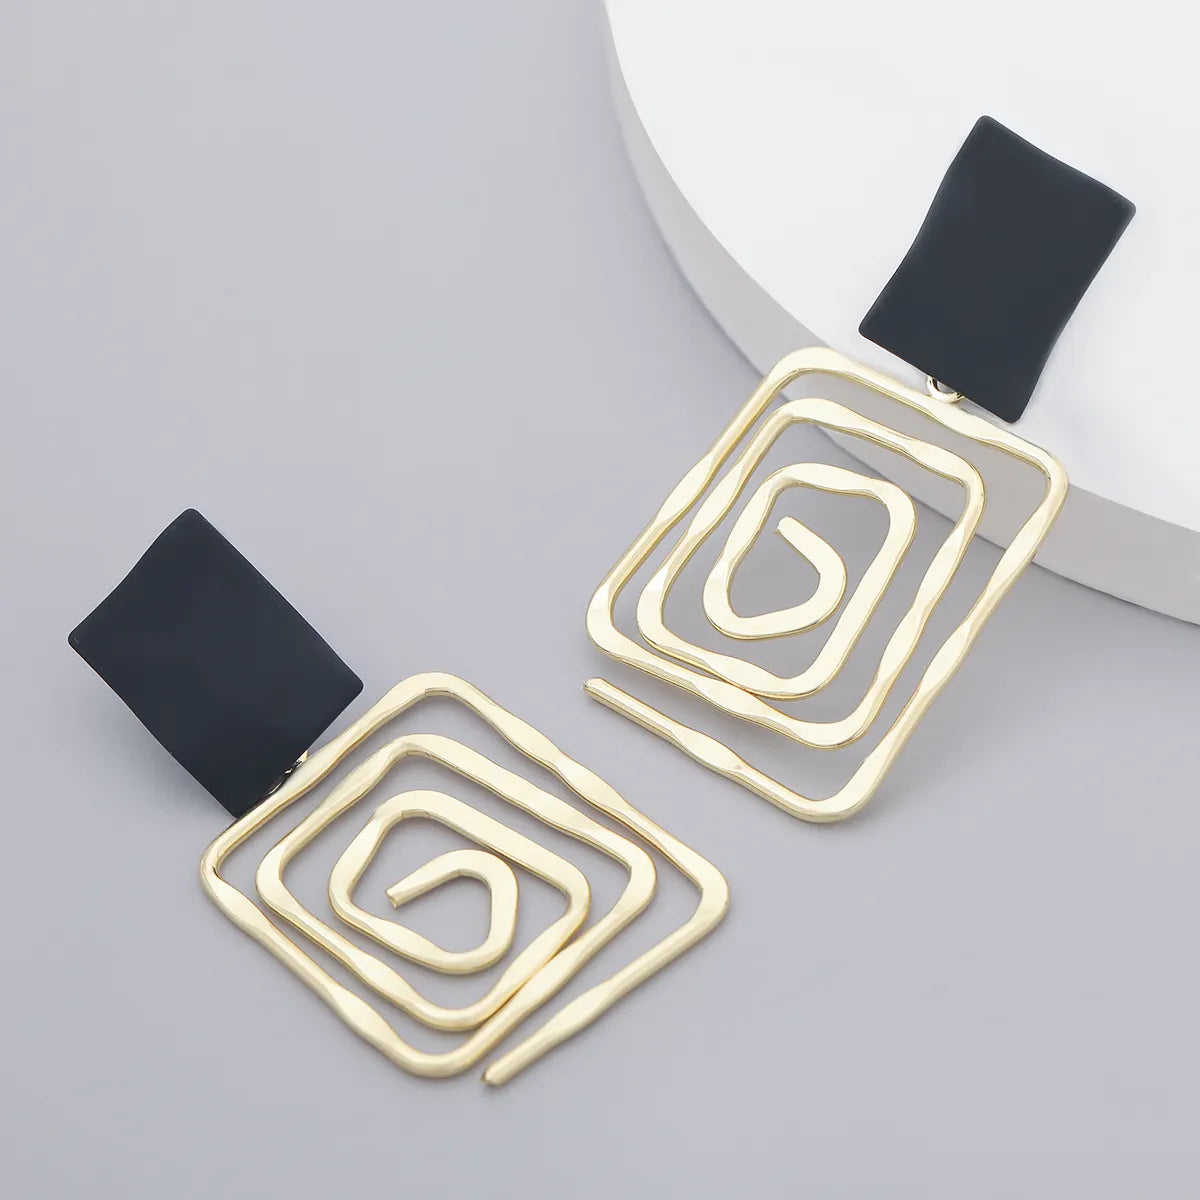 Black and Gold Squared earrings